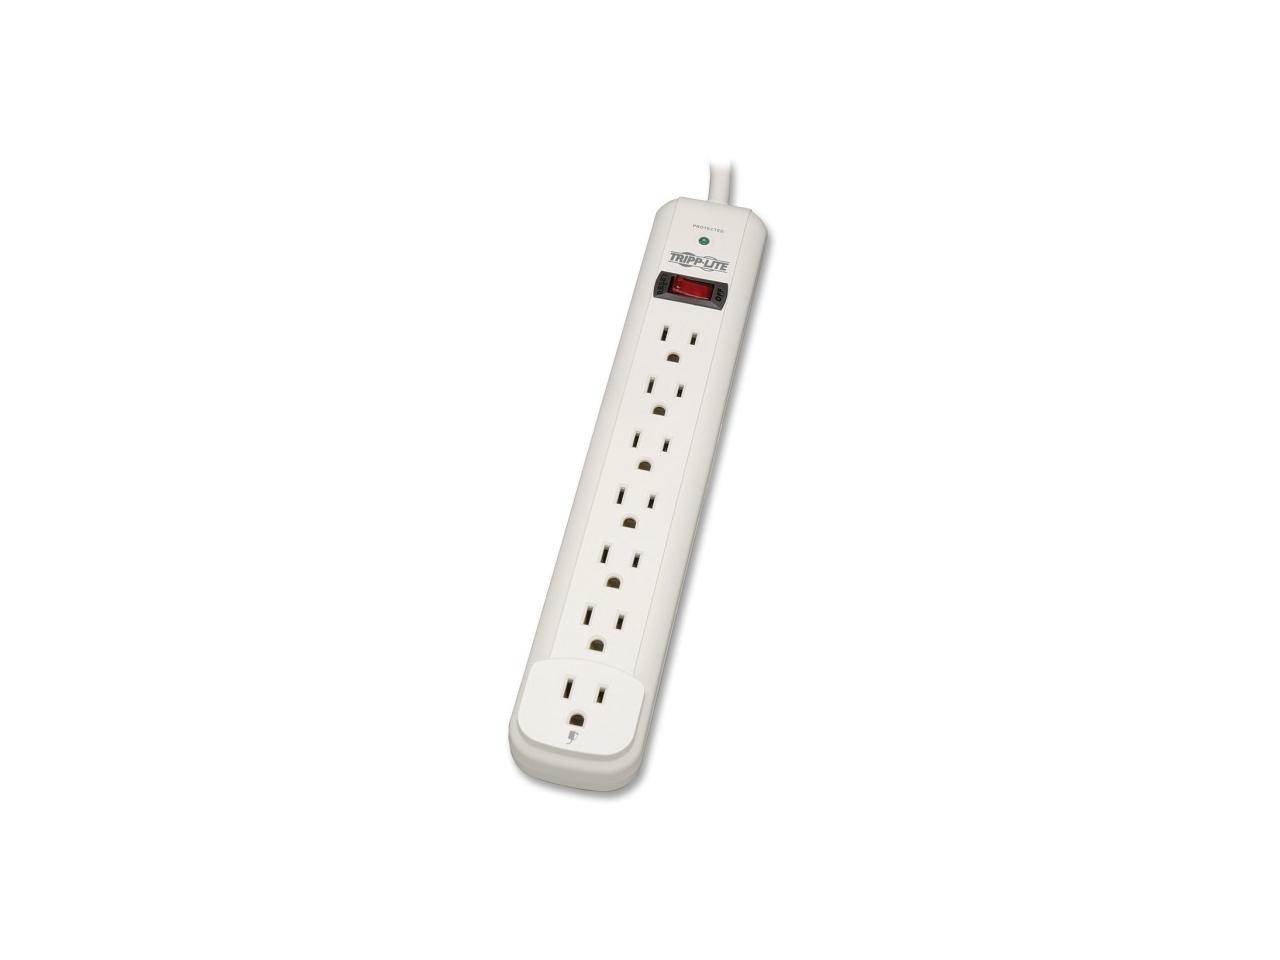 Tripp Lite TLP725 7 Outlets 1080 Joules 25' Cord Protect It! Surge Suppressor